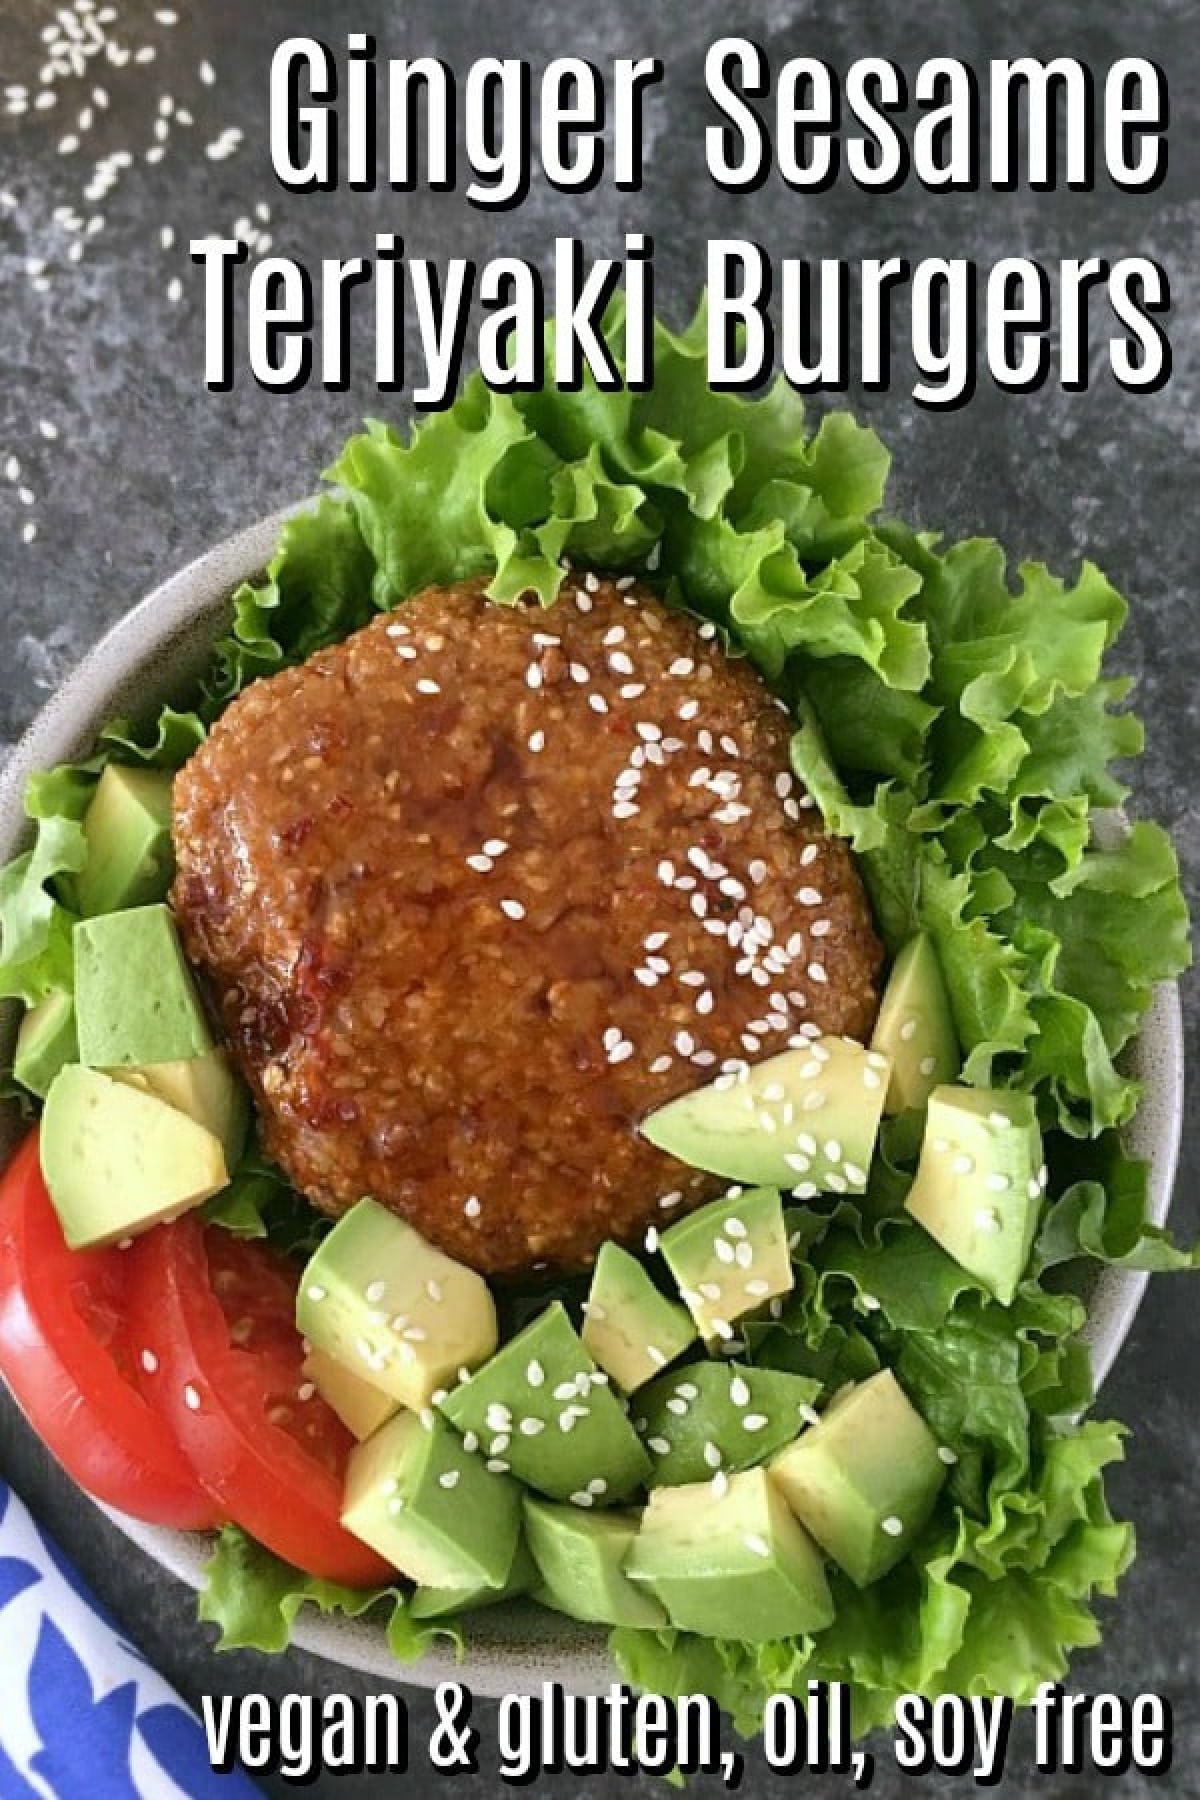 Overhead view of a ginger sesame teriyaki burger sitting on a bed of curly lettuce, tomato slices, and cubed avocado. The whole dish is topped with white sesame seeds, and a fork on a blue and white napkin sits alongside.